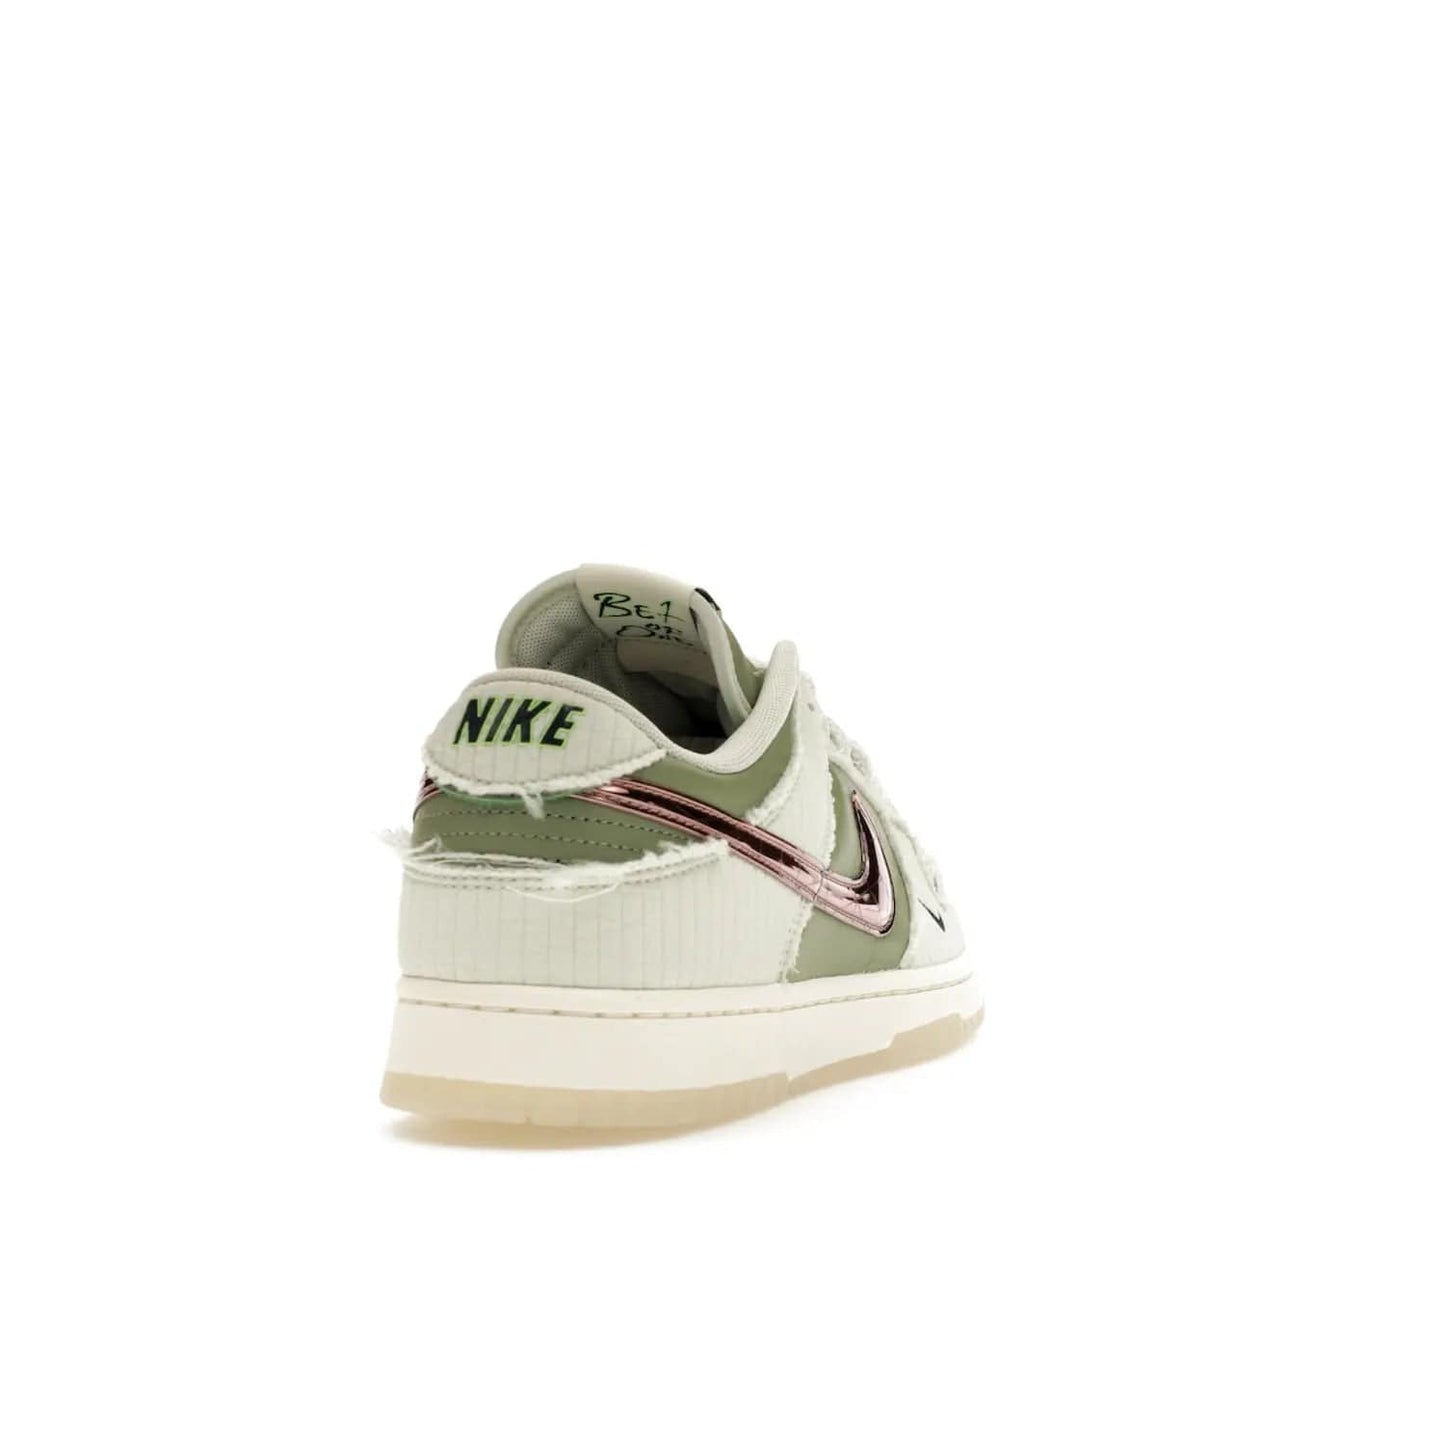 Nike Dunk Low Retro PRM Kyler Murray Be 1 of One - Image 30 - Only at www.BallersClubKickz.com - Introducing the Nike Dunk Low Retro PRM Kyler Murray "Be 1 of One"! A Sea Glass upper with Sail and Oil Green accents, finished with Rose Gold accents. Drop date: November 10th.